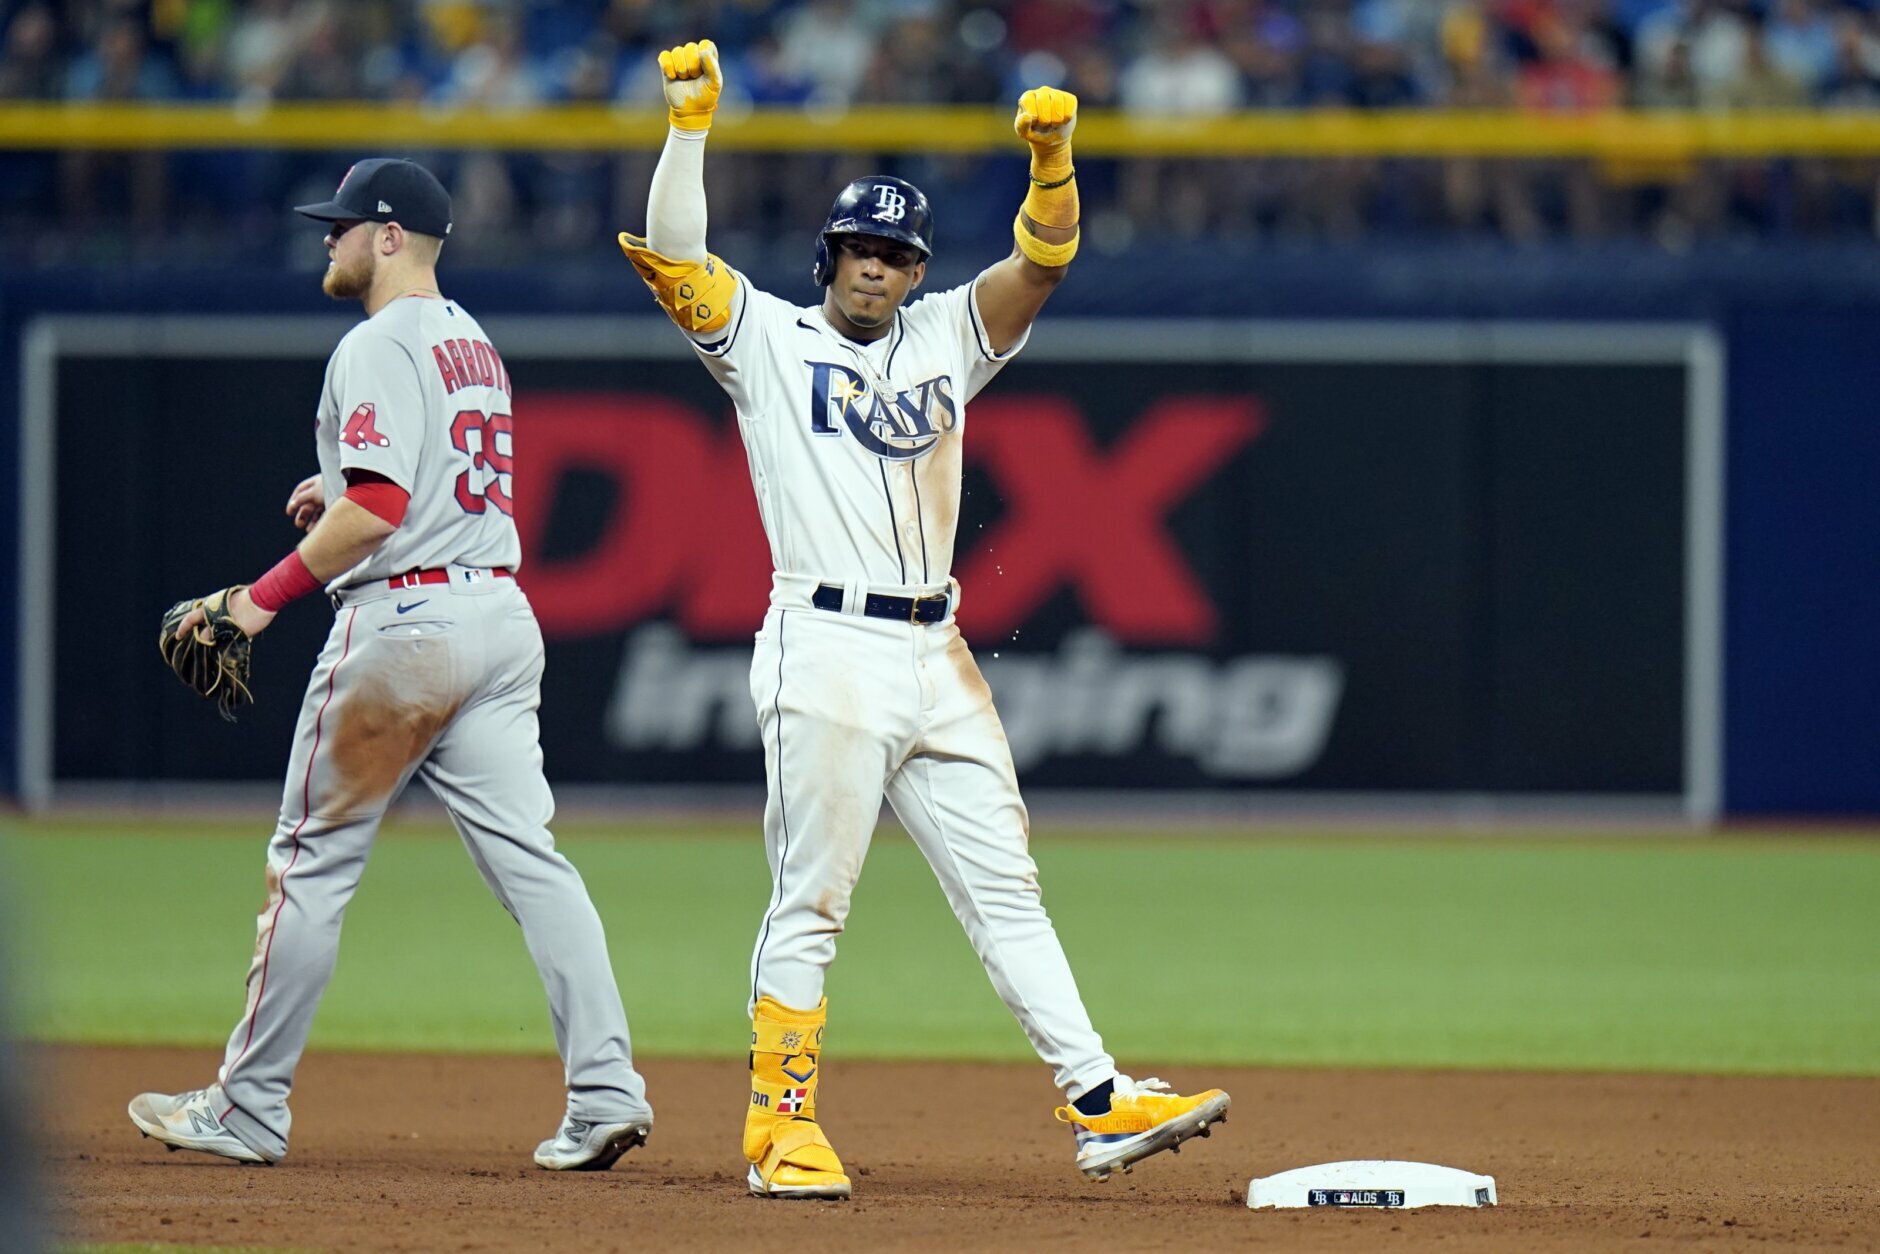 Rays' Randy Arozarena is the breakout star of this postseason